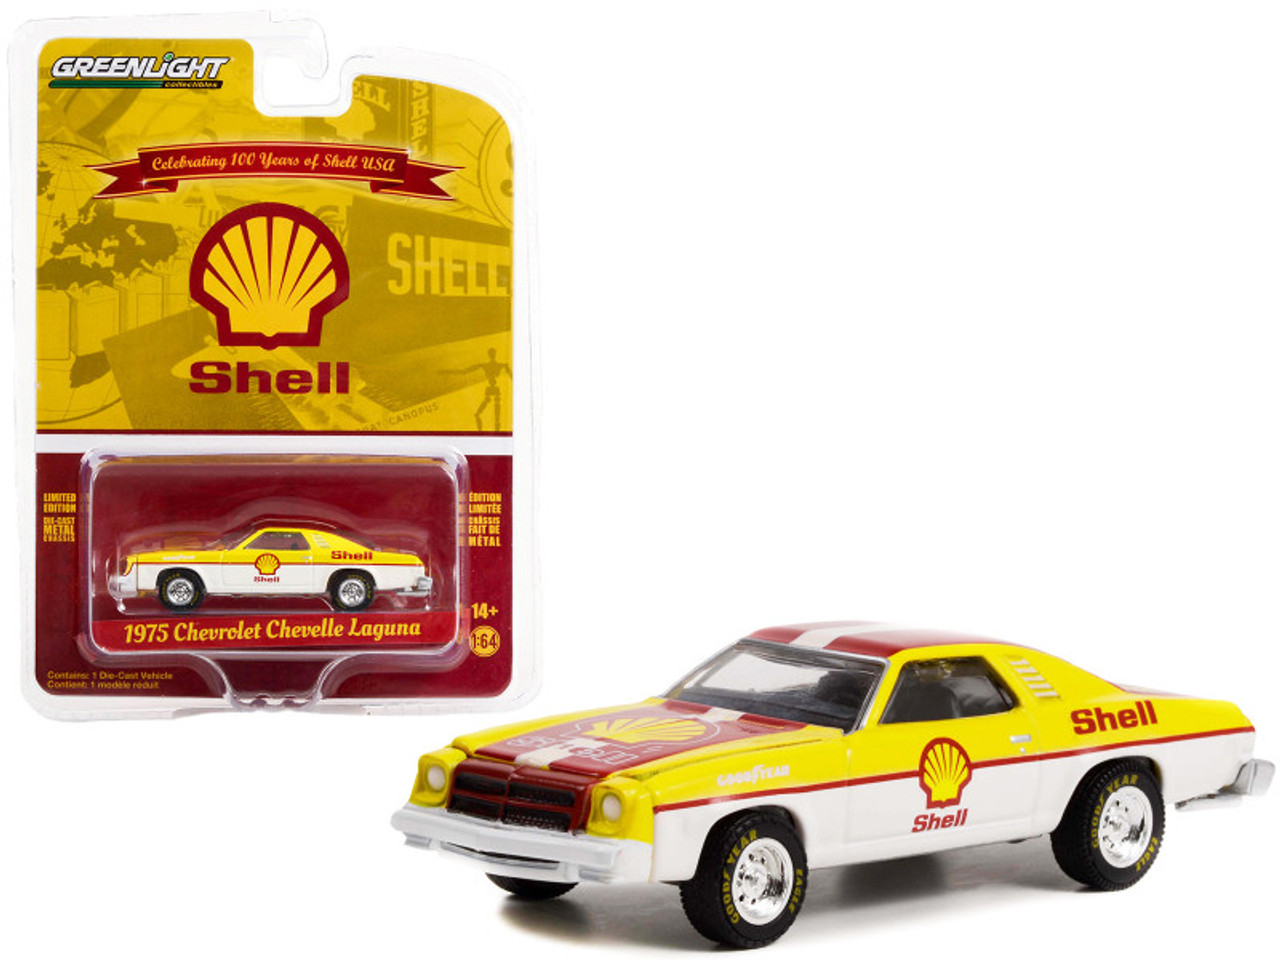 1975 Chevrolet Chevelle Laguna Yellow and White with Red Stripes "Shell Oil 100th Anniversary" "Anniversary Collection" Series 14 1/64 Diecast Model Car by Greenlight